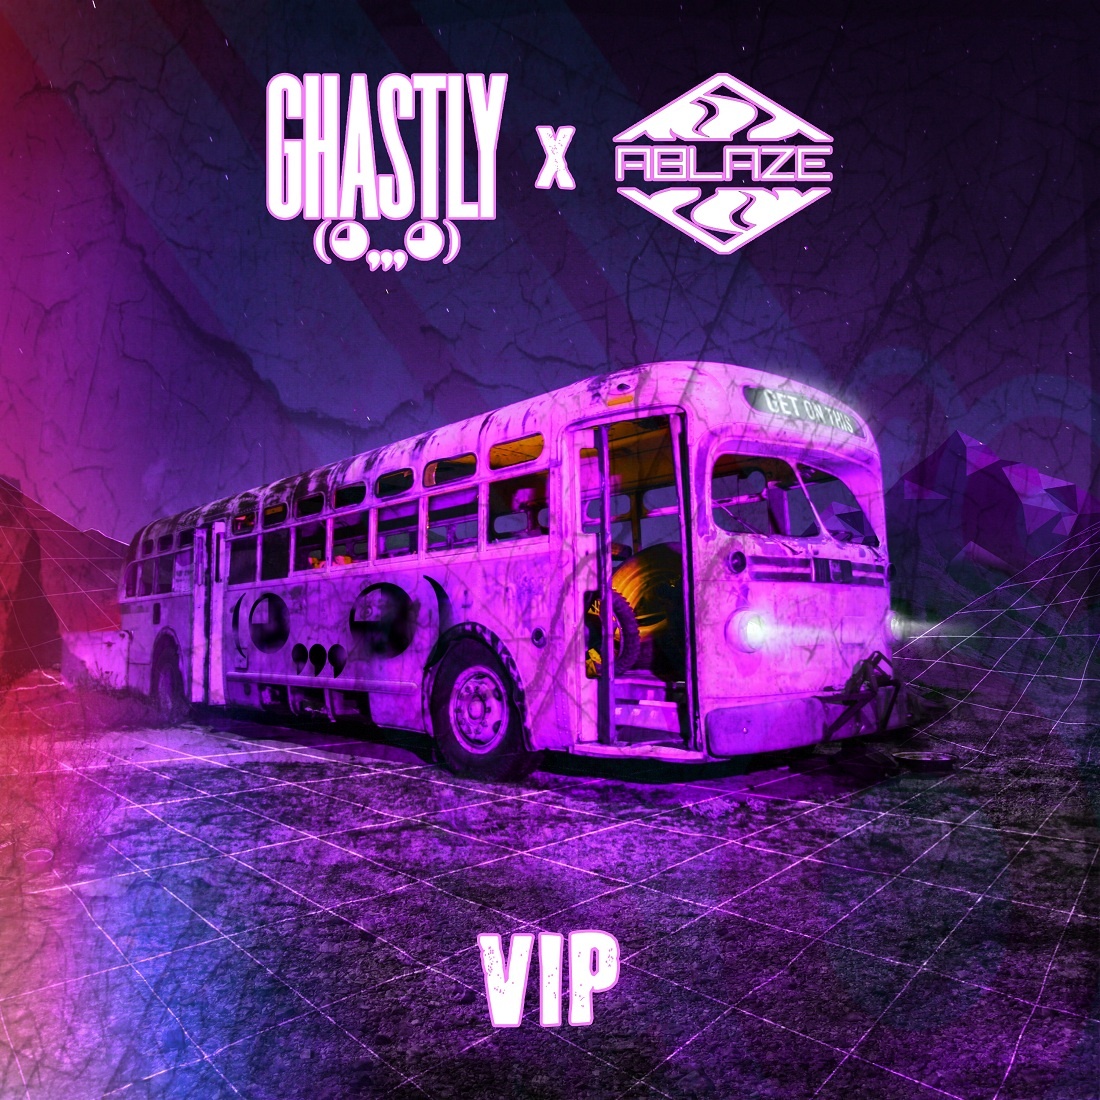 Get On This (Ghastly x Ablaze VIP)